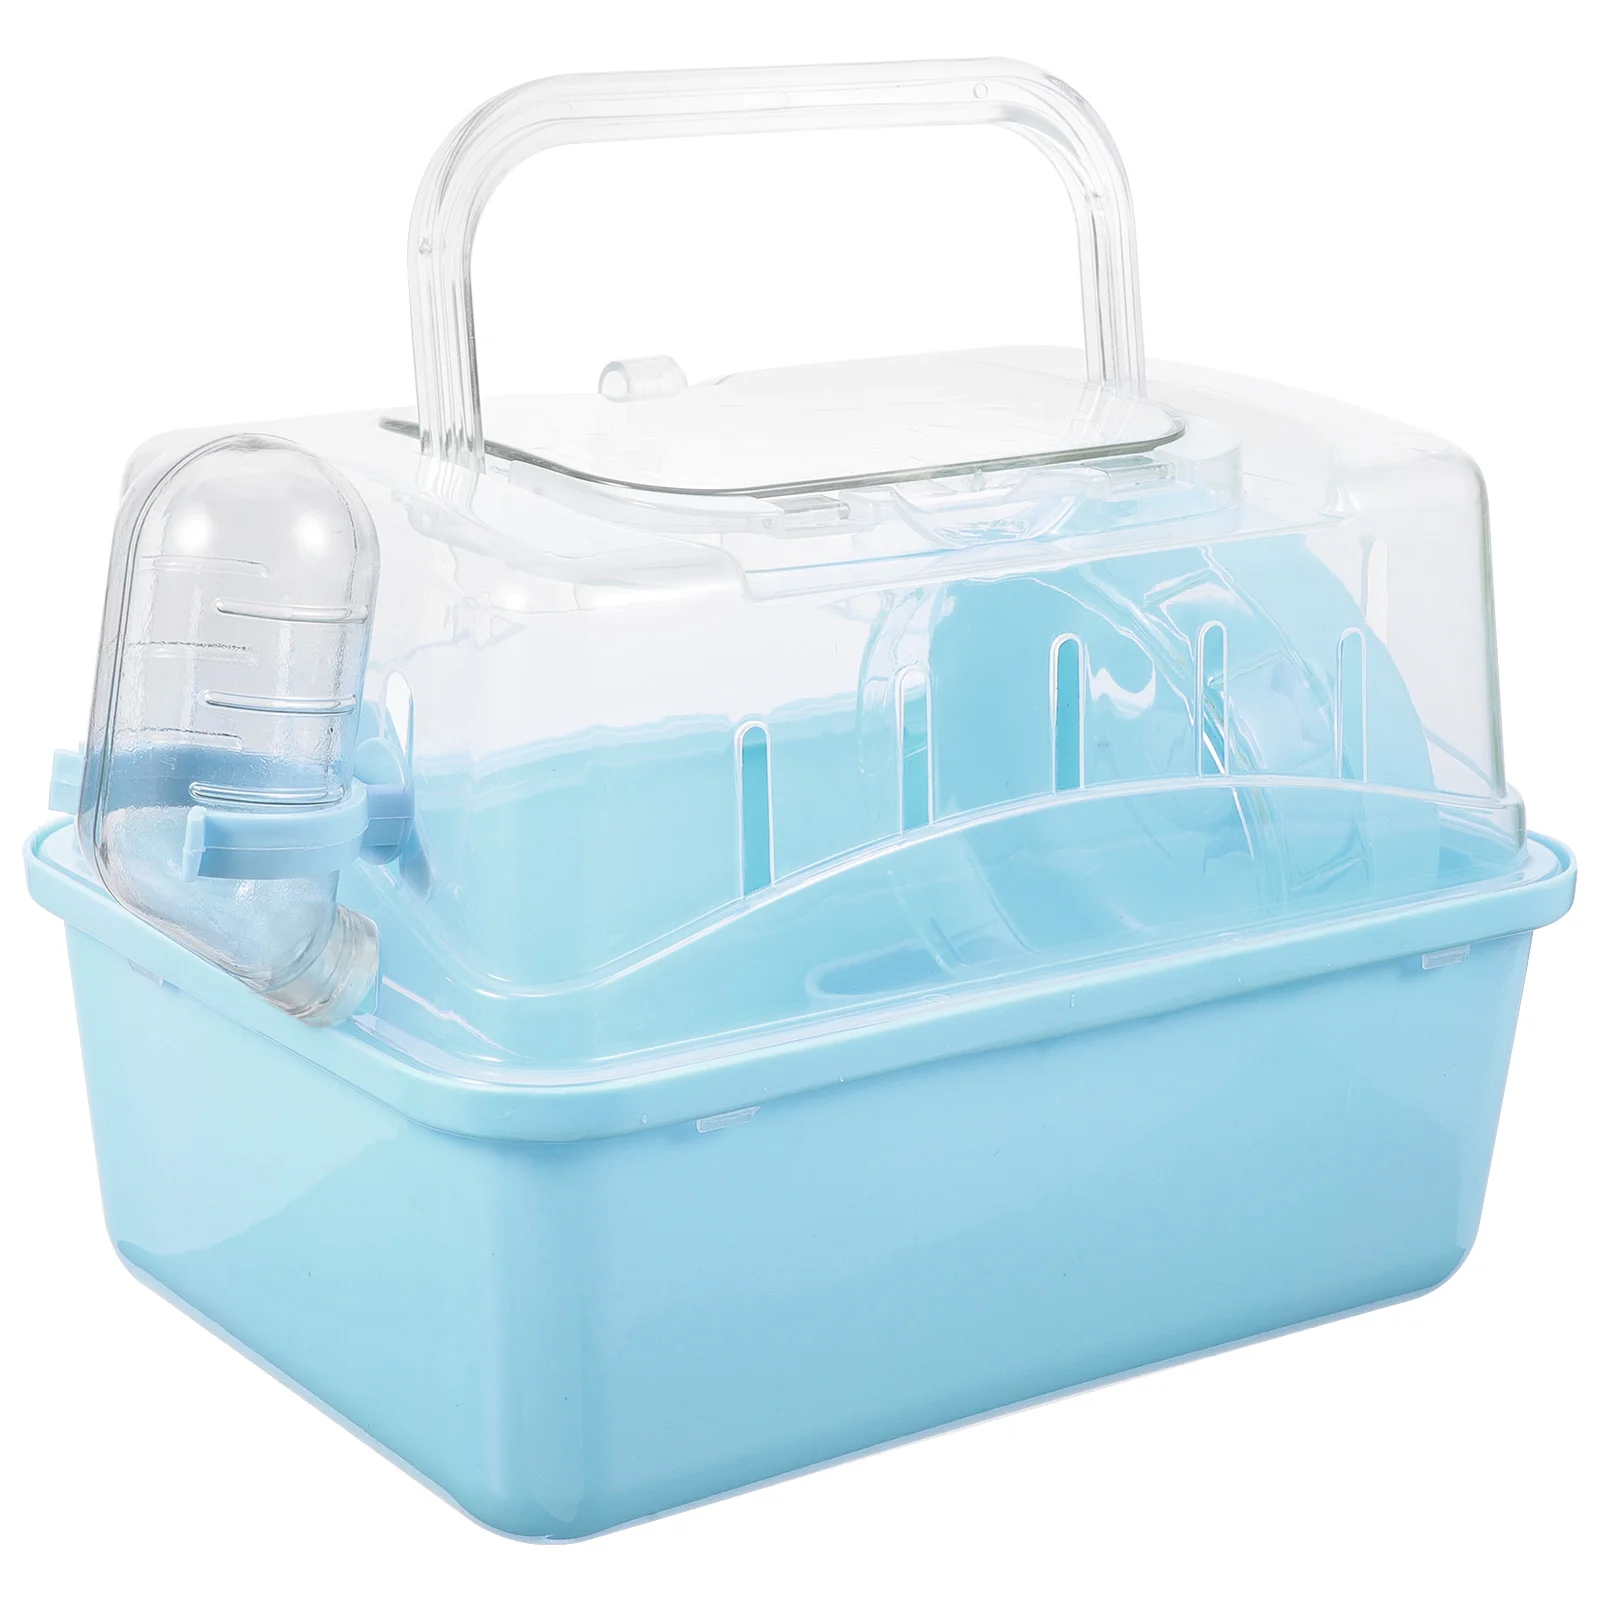 

Hamster Cage Travel Carrier Guinea Pigs Cages Hamsters Clear Stand Case Supply Small Containers Carrying Holder Household Pet